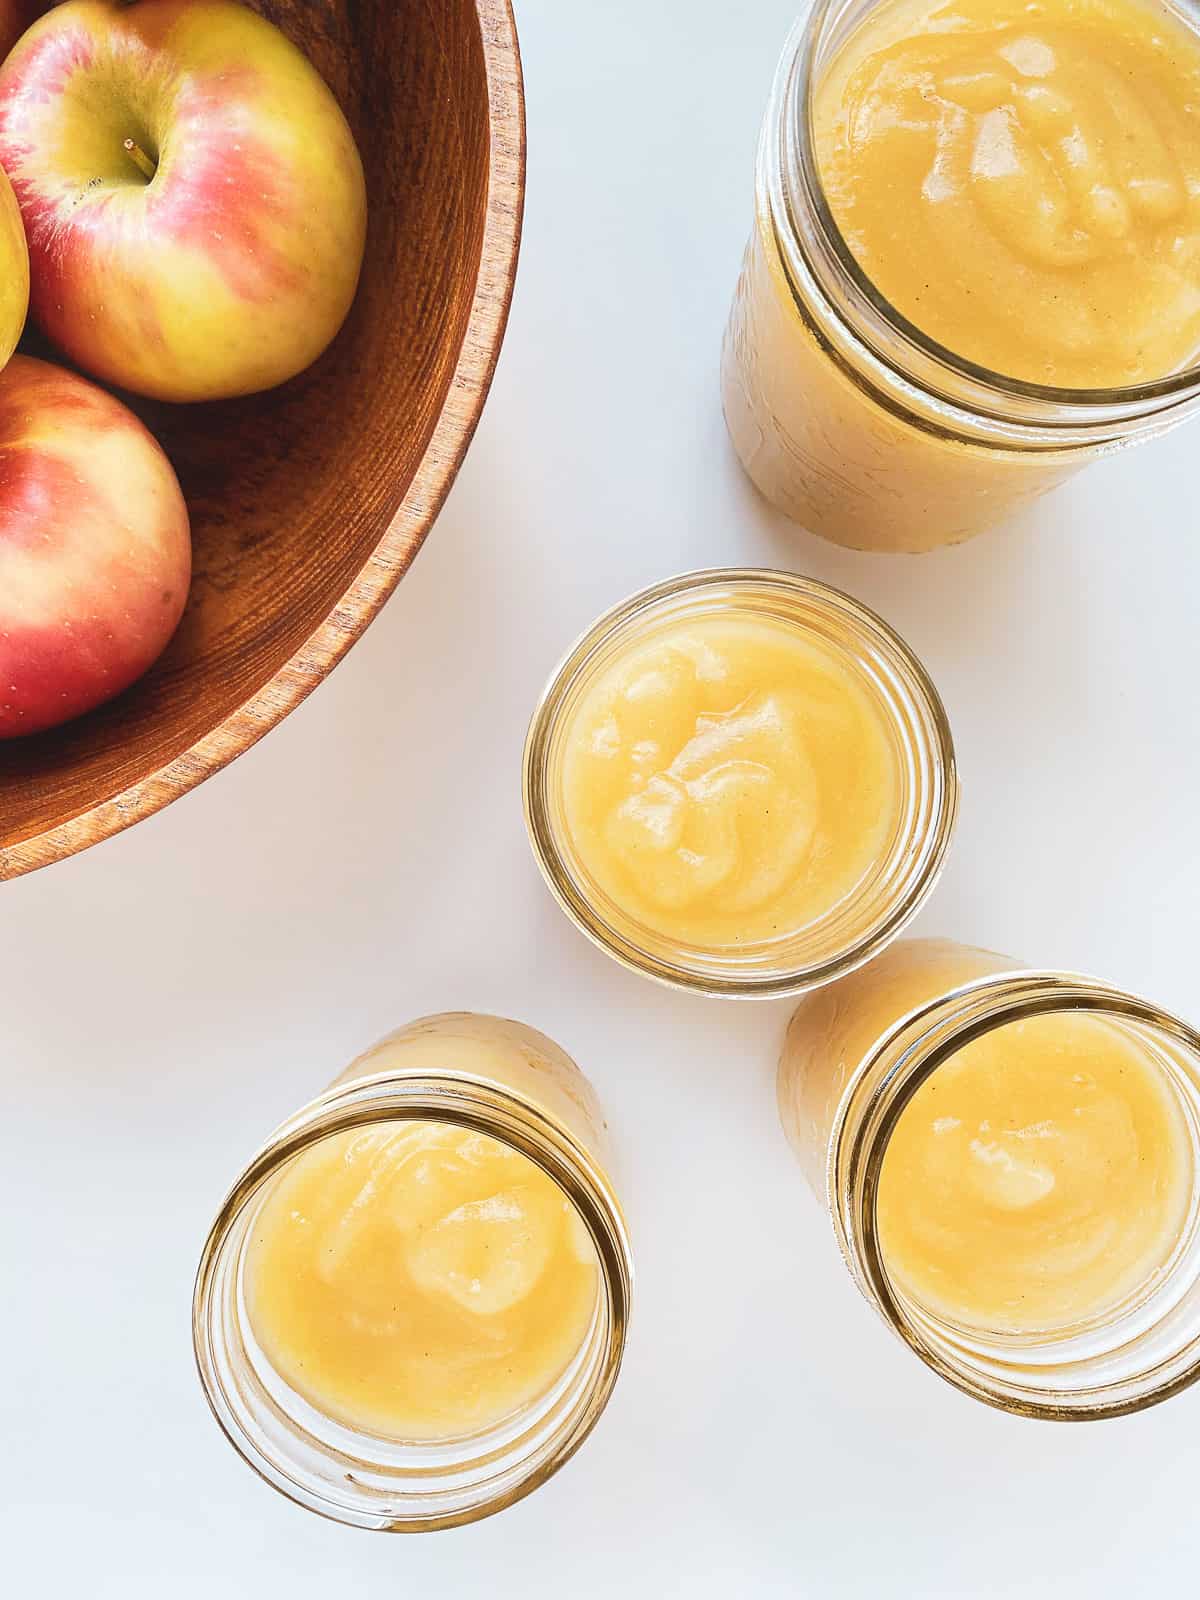 An image of homemade applesauce in glass jars on a white countertop.